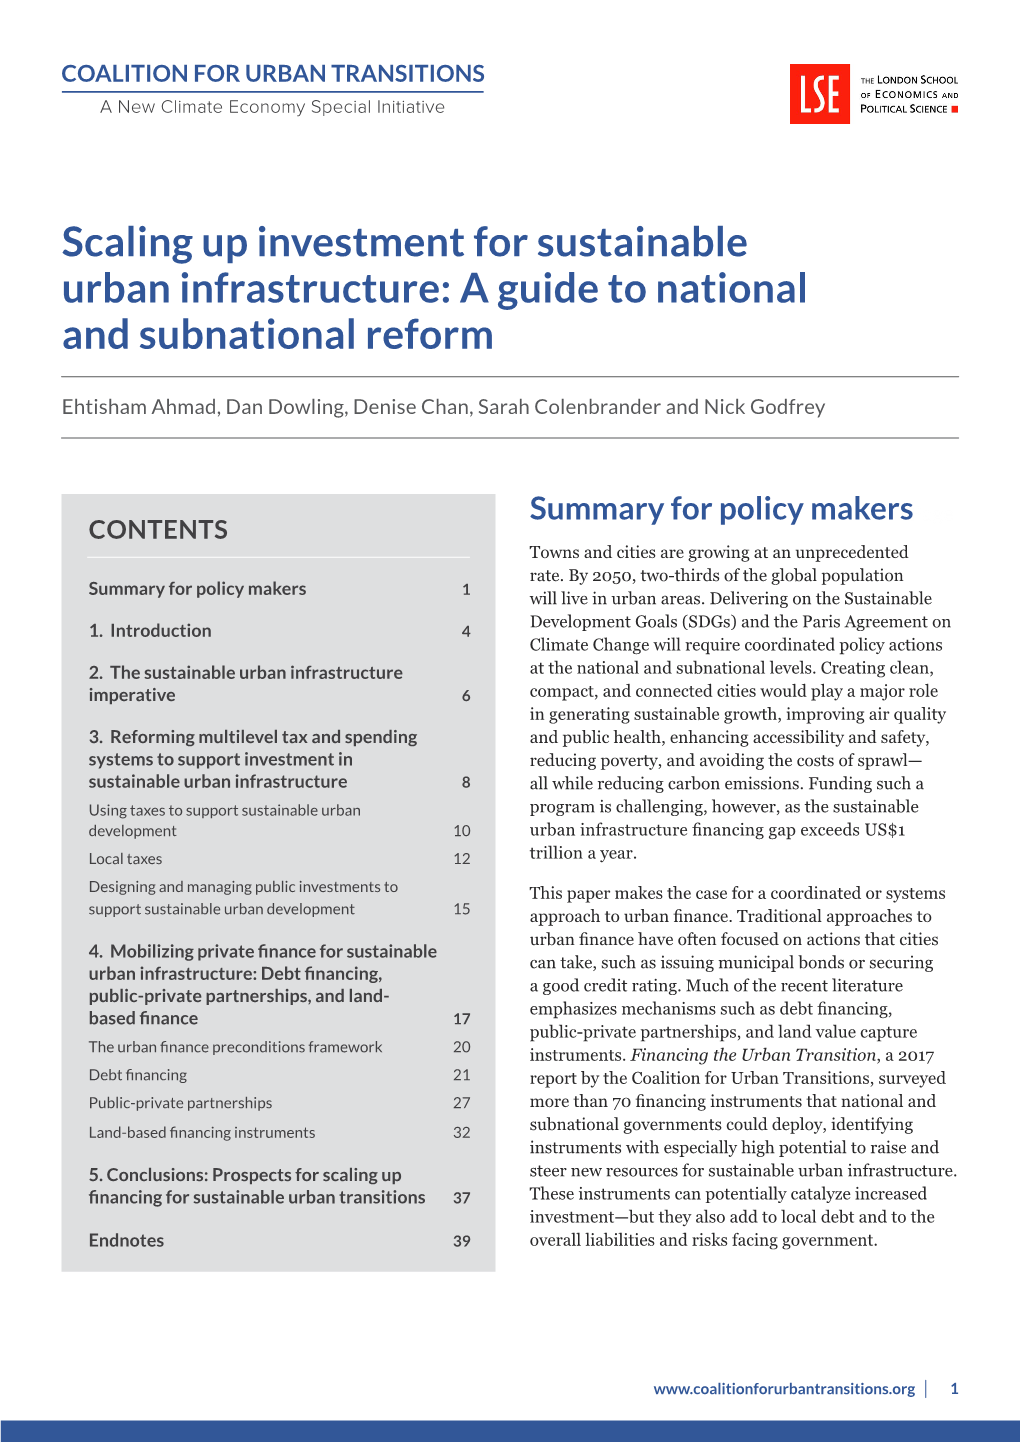 Scaling up Investment for Sustainable Urban Infrastructure: a Guide to National and Subnational Reform